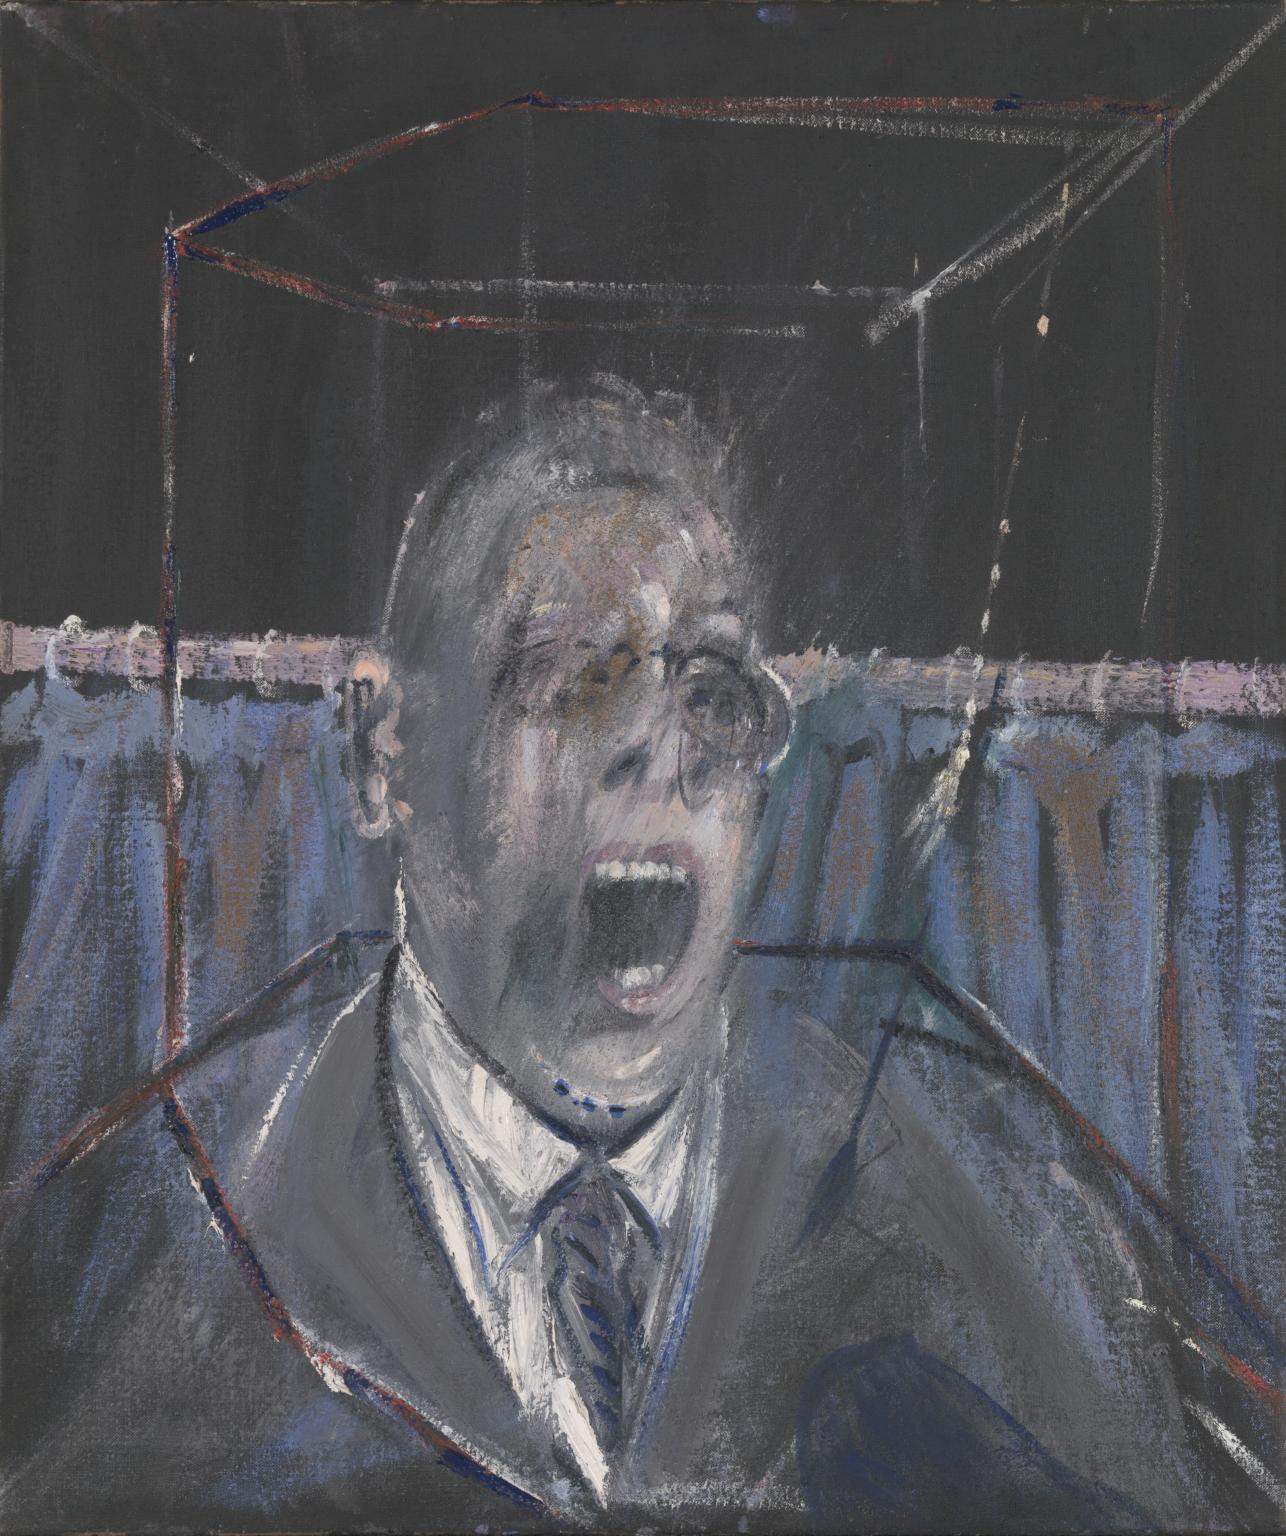 Francis Bacon “Study for a Portrait”, 1952, Gallery Tate, London.